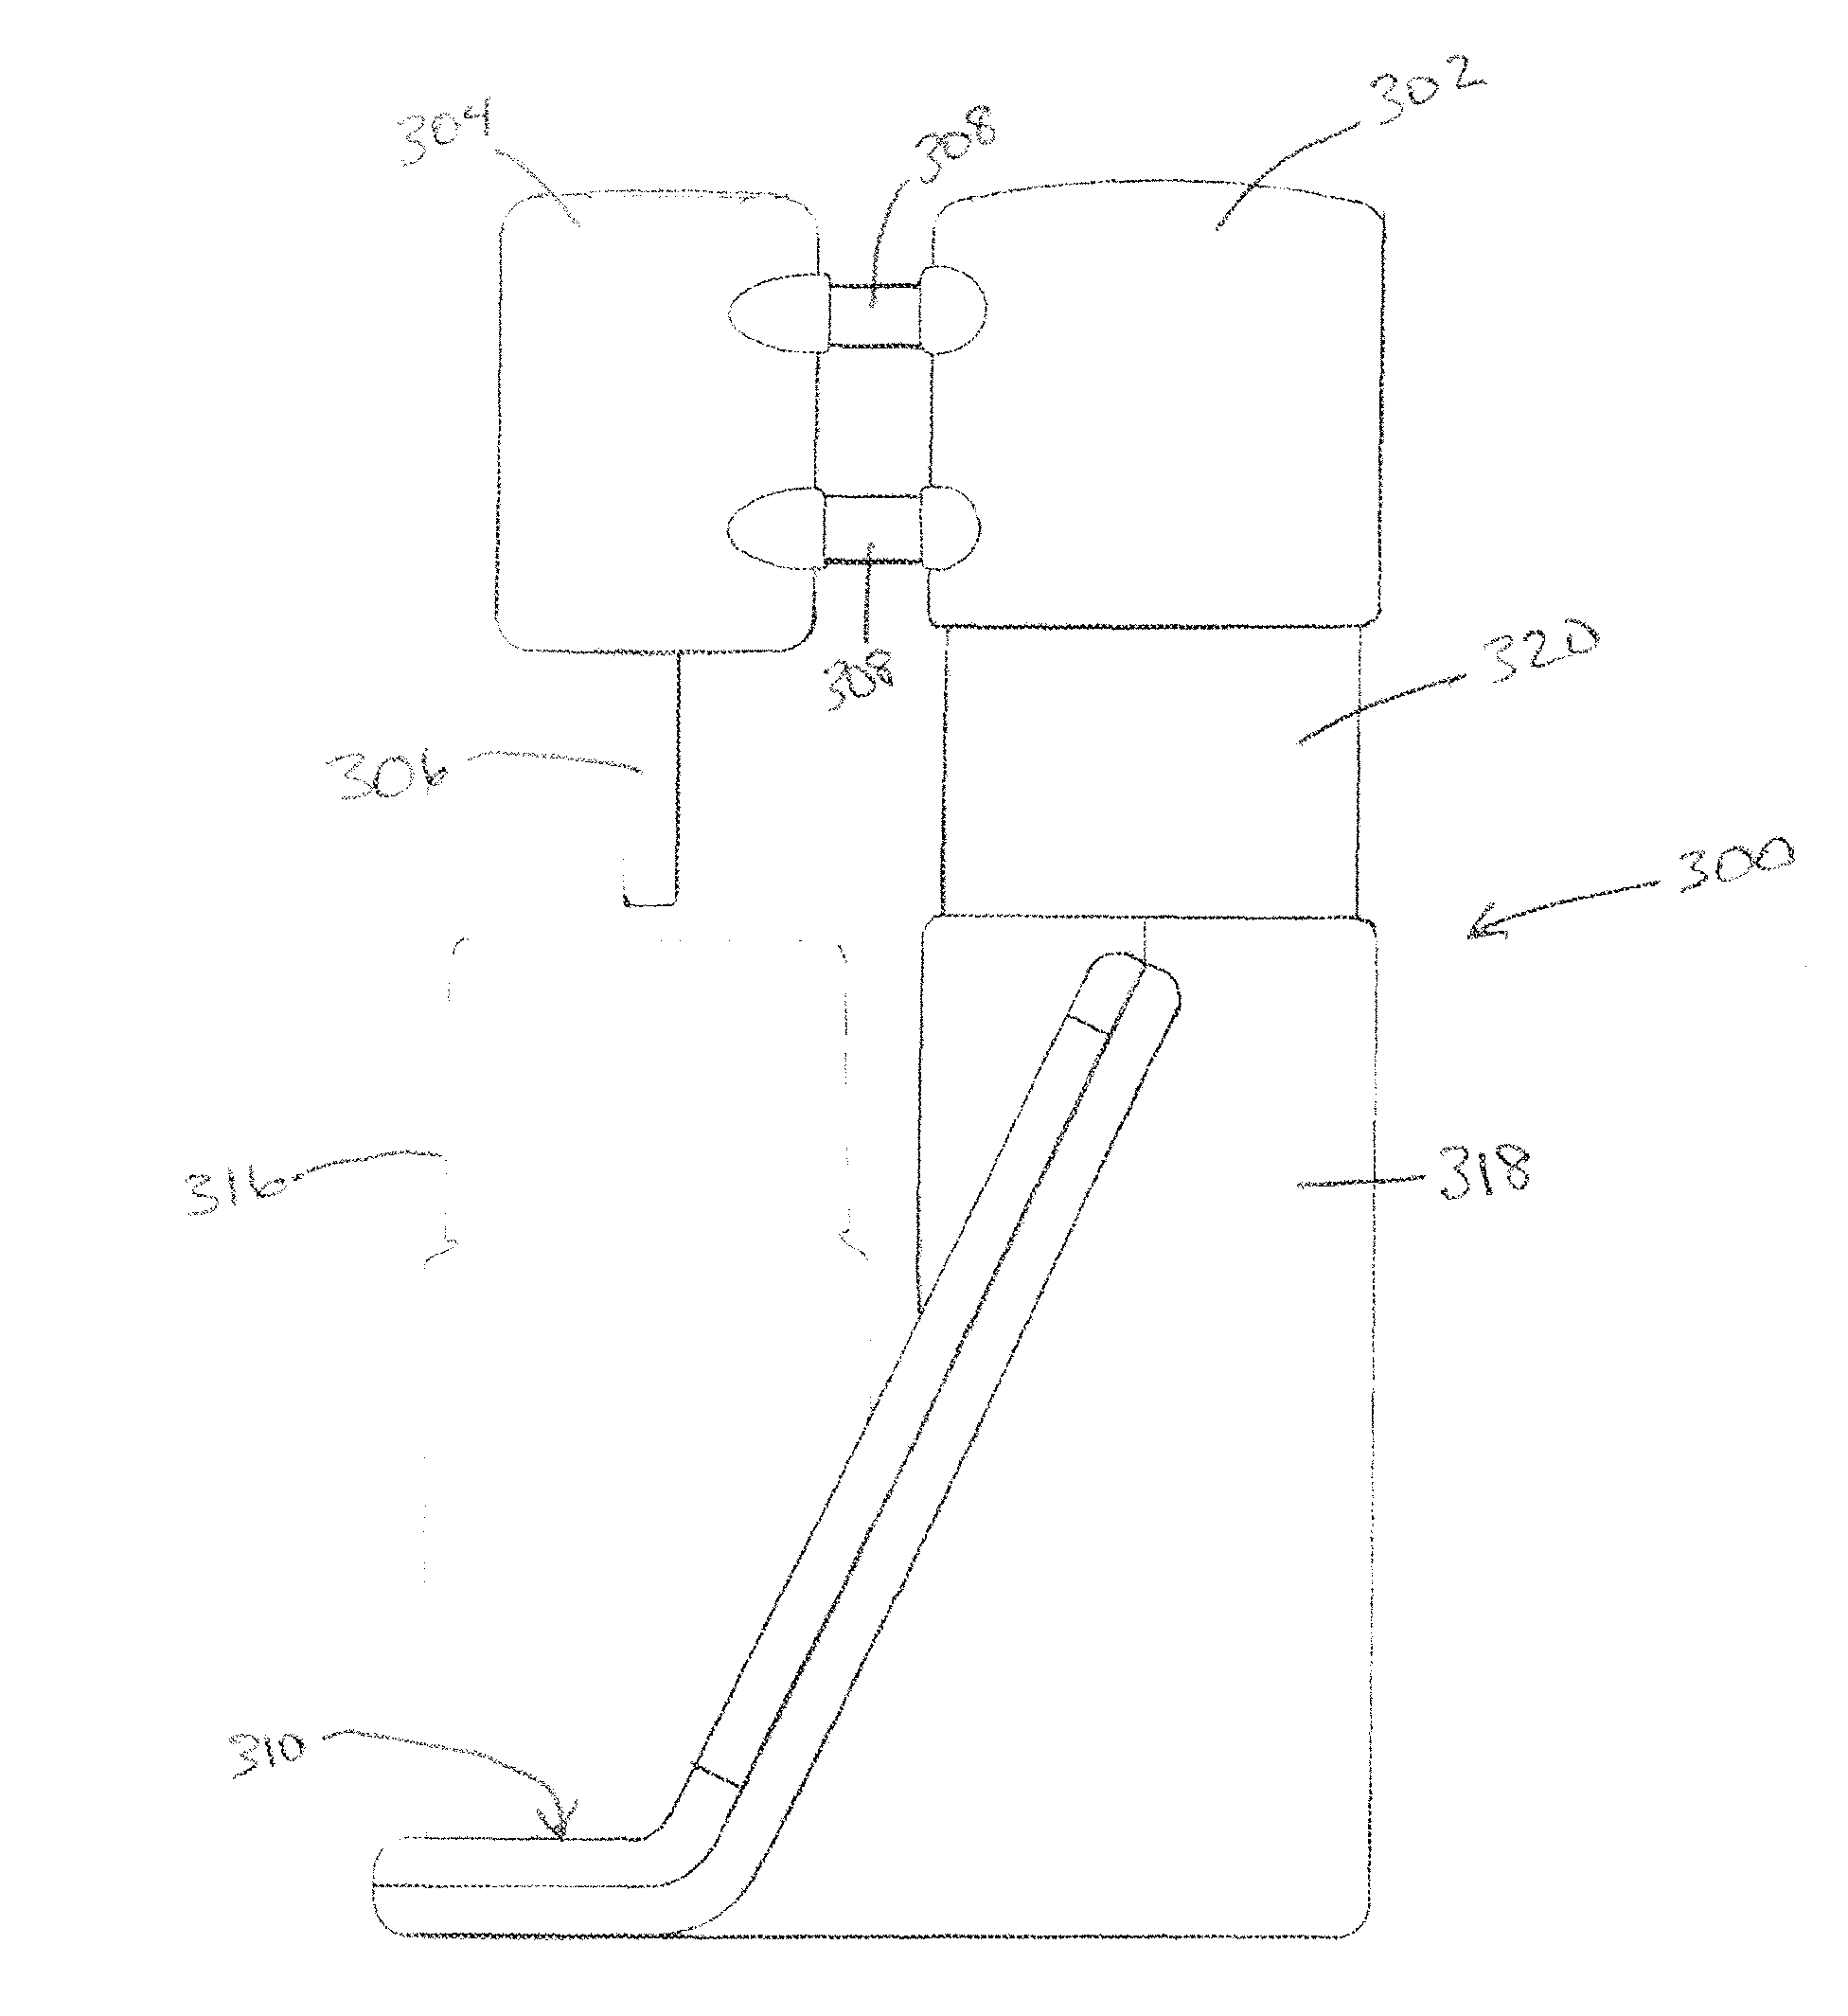 Beverage mixing system and process